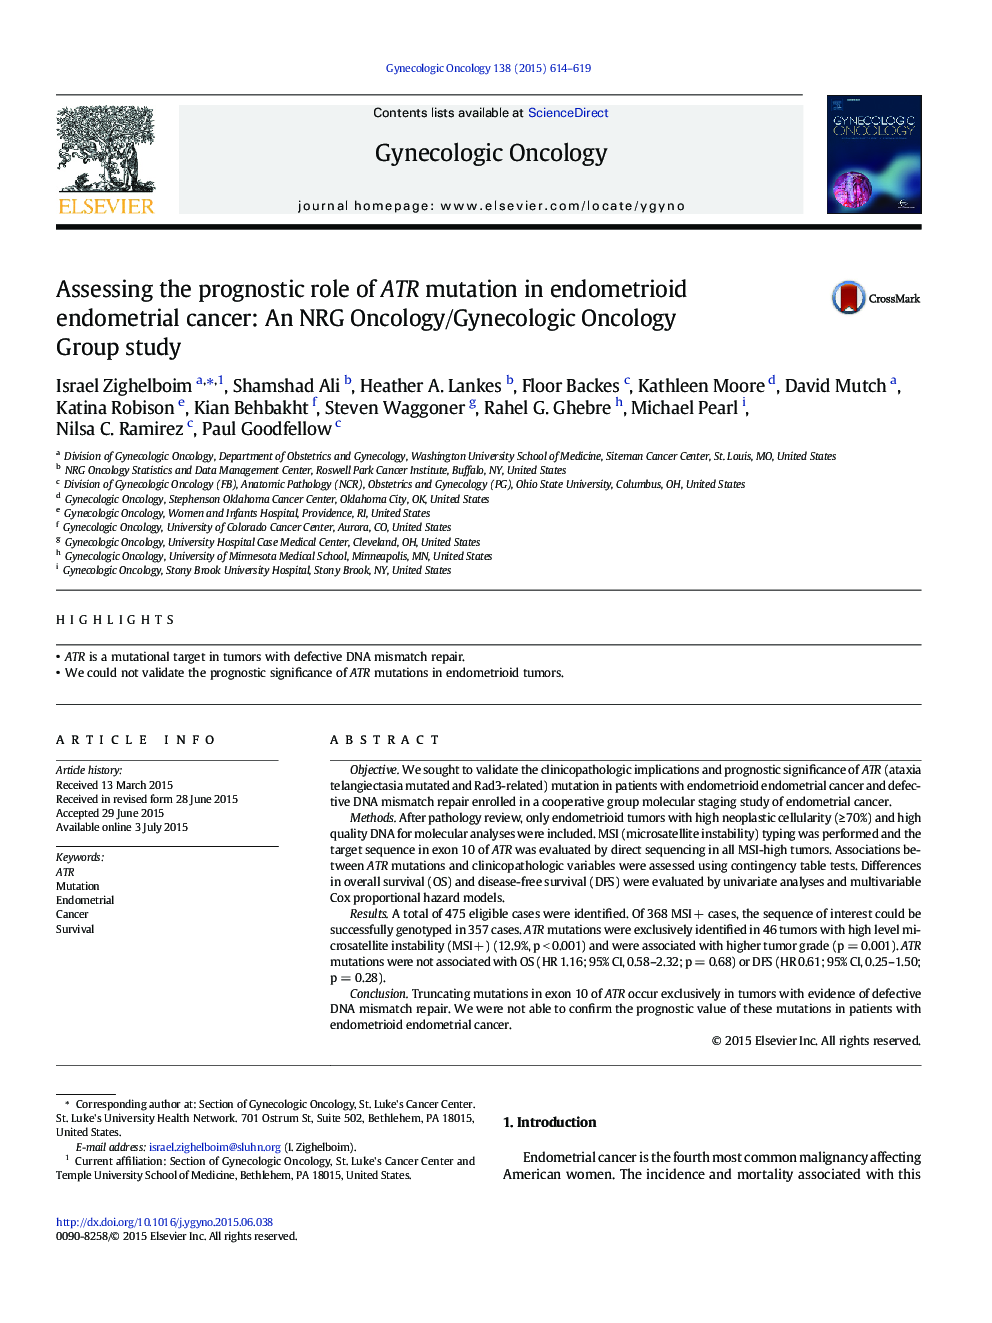 Assessing the prognostic role of ATR mutation in endometrioid endometrial cancer: An NRG Oncology/Gynecologic Oncology Group study